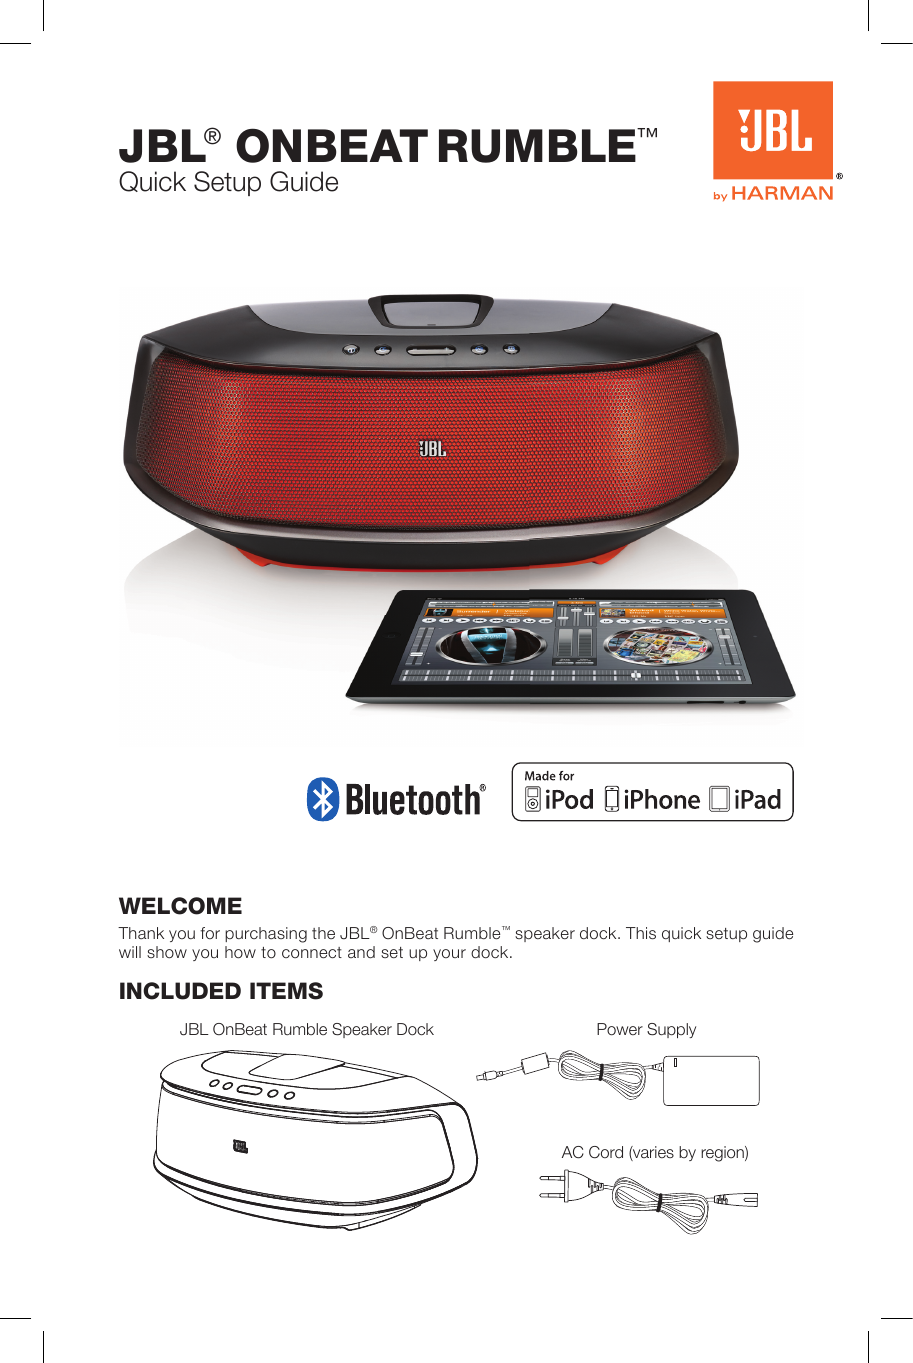 Quick Setup GuideJBL® ONBE AT RUMBLE™ WELCOMEThank you for purchasing the JBL® OnBeat Rumble™ speaker dock. This quick setup guide will show you how to connect and set up your dock.INCLUdEd ITEMSAC Cord (varies by region)Power SupplyJBL OnBeat Rumble Speaker Dock